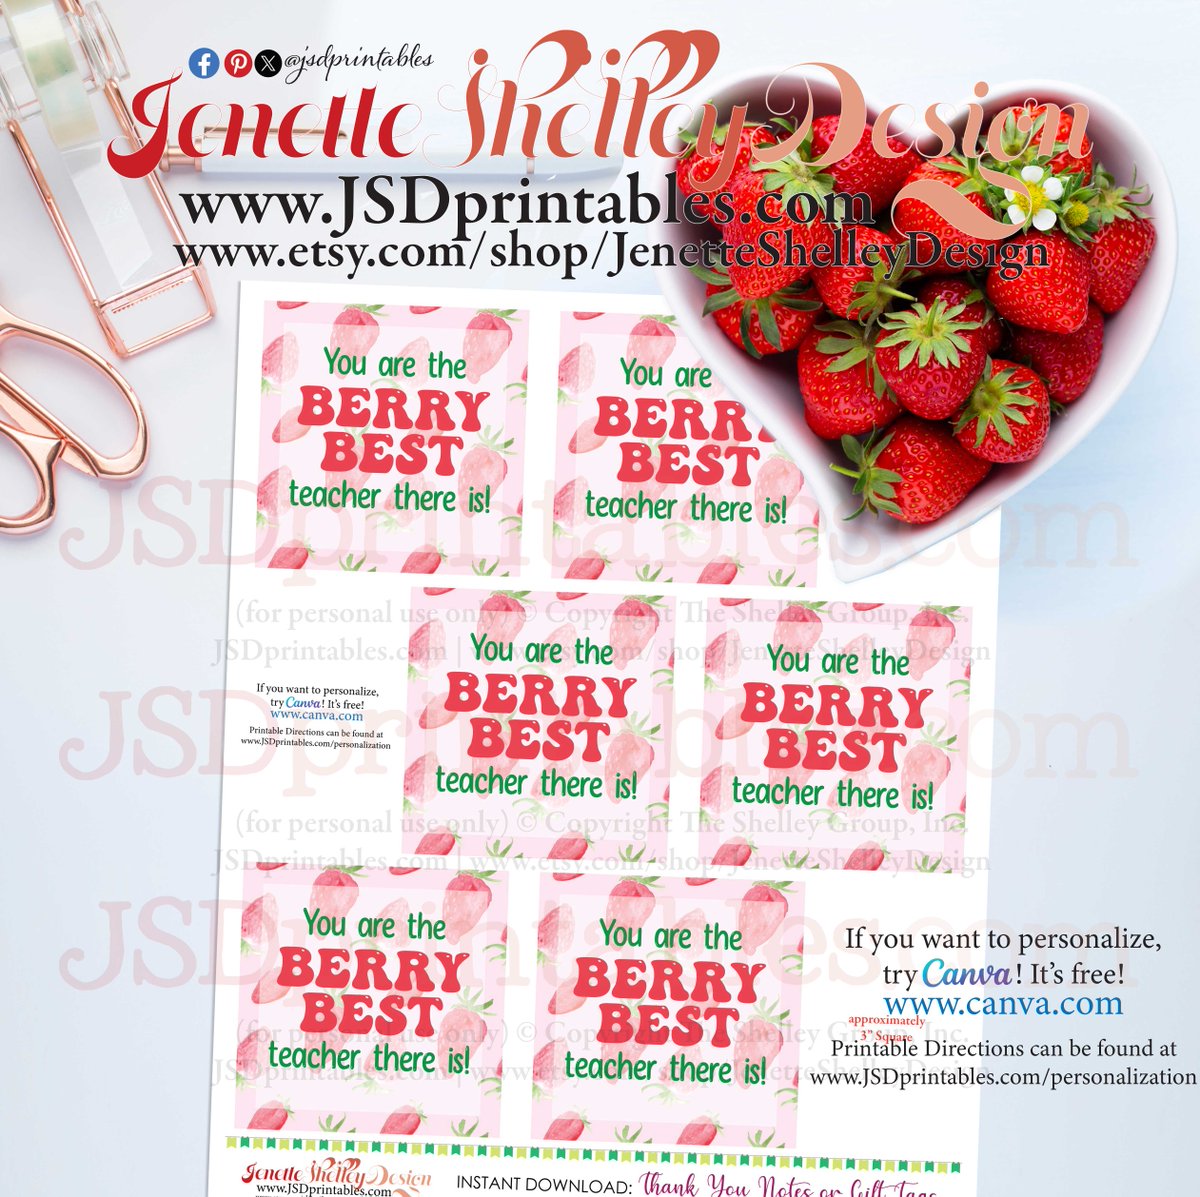 jsdprintables.com/shop/berry-bes… 🍓You Are the BERRY BEST Teacher There Is *Strawberry Printable Gift Tags*🍓@jsdprintables #teachergifts #strawberries #instantdownload #teacherlife #gifts #giftsforteacher #loveateacher #teacherappreciation #strawberryjam #stawberrygifts